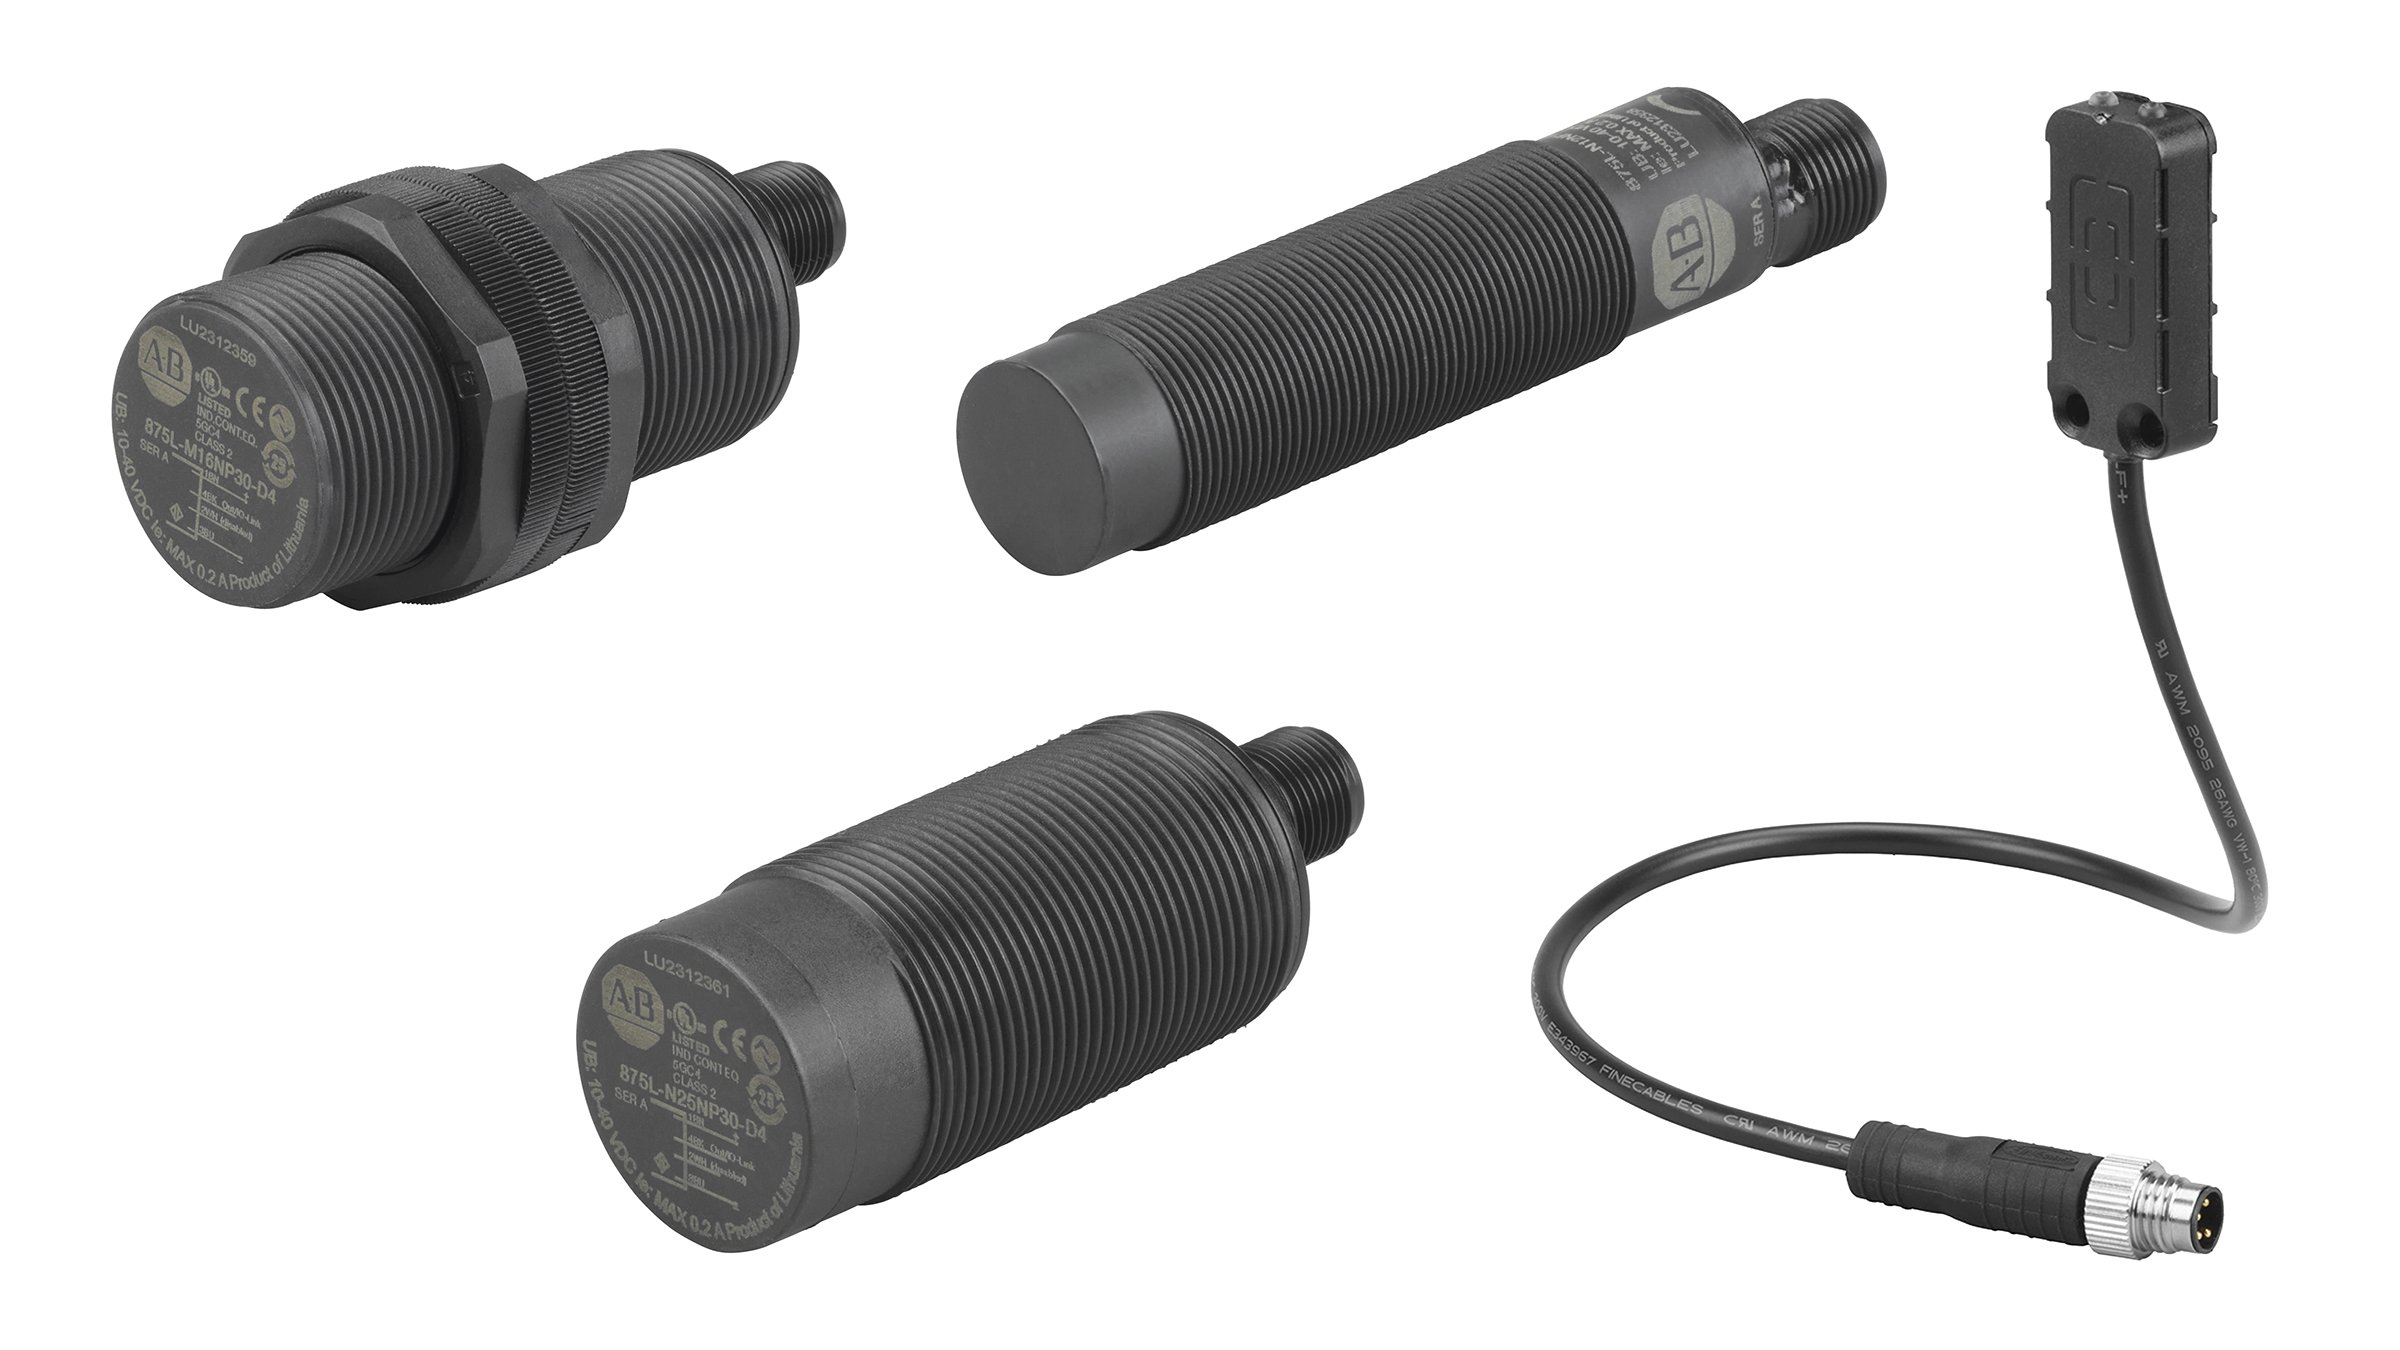 Collage of four black capacitive sensors (clockwise at 12:00 a Cylindrical Sensor with 18 mm Barrel Diameter and DC Micro Quick Disconnect, at 1:00 a 34 mm Long Rectangular sensor with black 2 m PVC Cable, at 7:00 Cylindrical Sensor with 30 mm Barrel Diameter, 2 m PVC Cable and 11:00 a Cylindrical Sensor with 30 mm Barrel Diameter and DC Micro Quick Disconnect